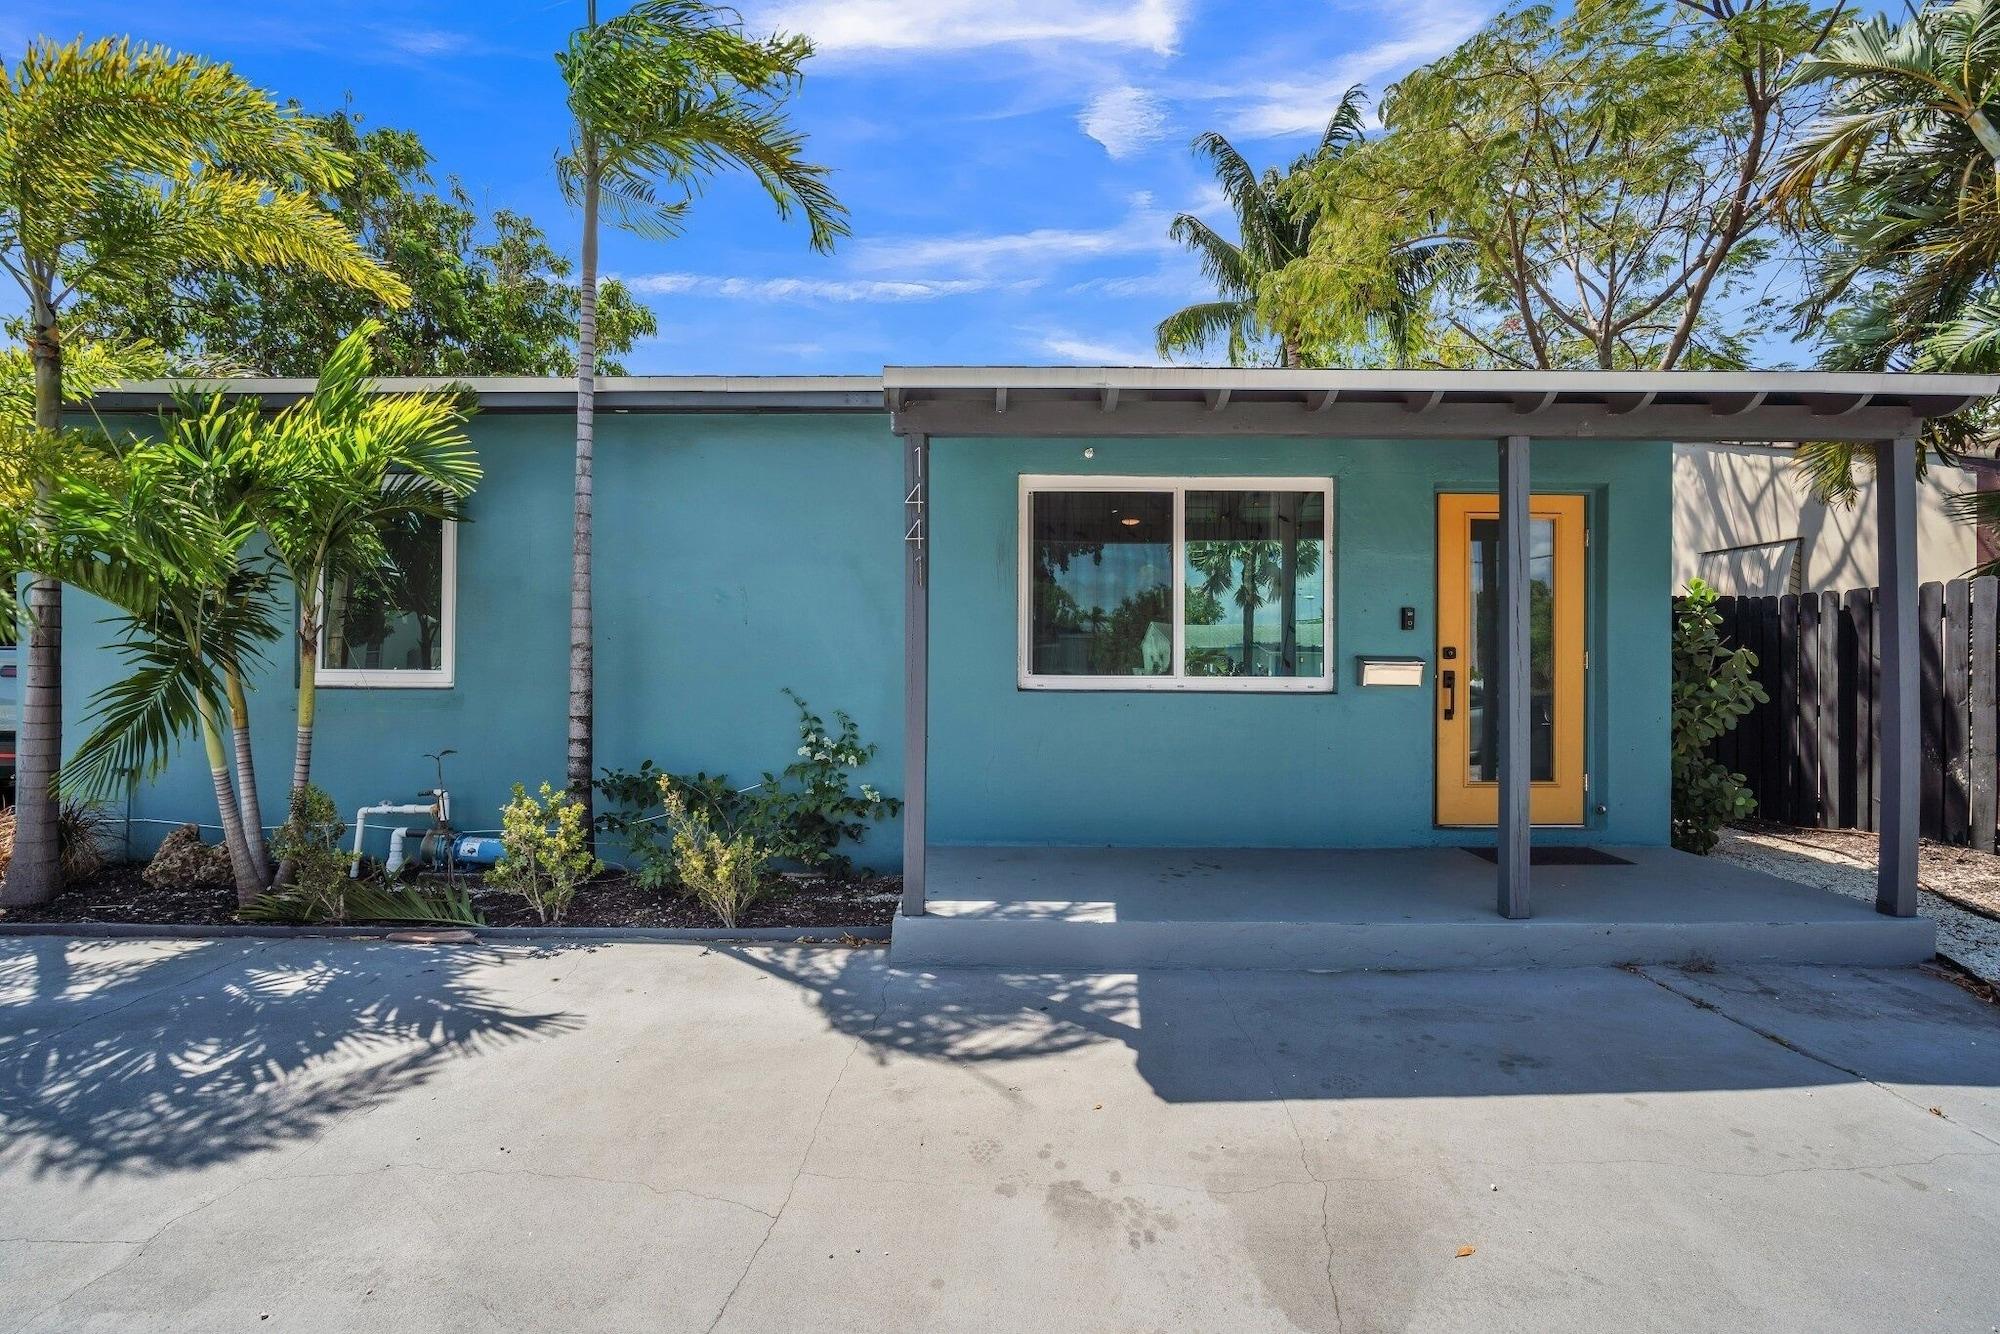 Exterior View Great Wilton Manors Location With Two Separate Spaces! Perfect For Your Group! Newly Remodeled 3 Bedroom Home by Redawning